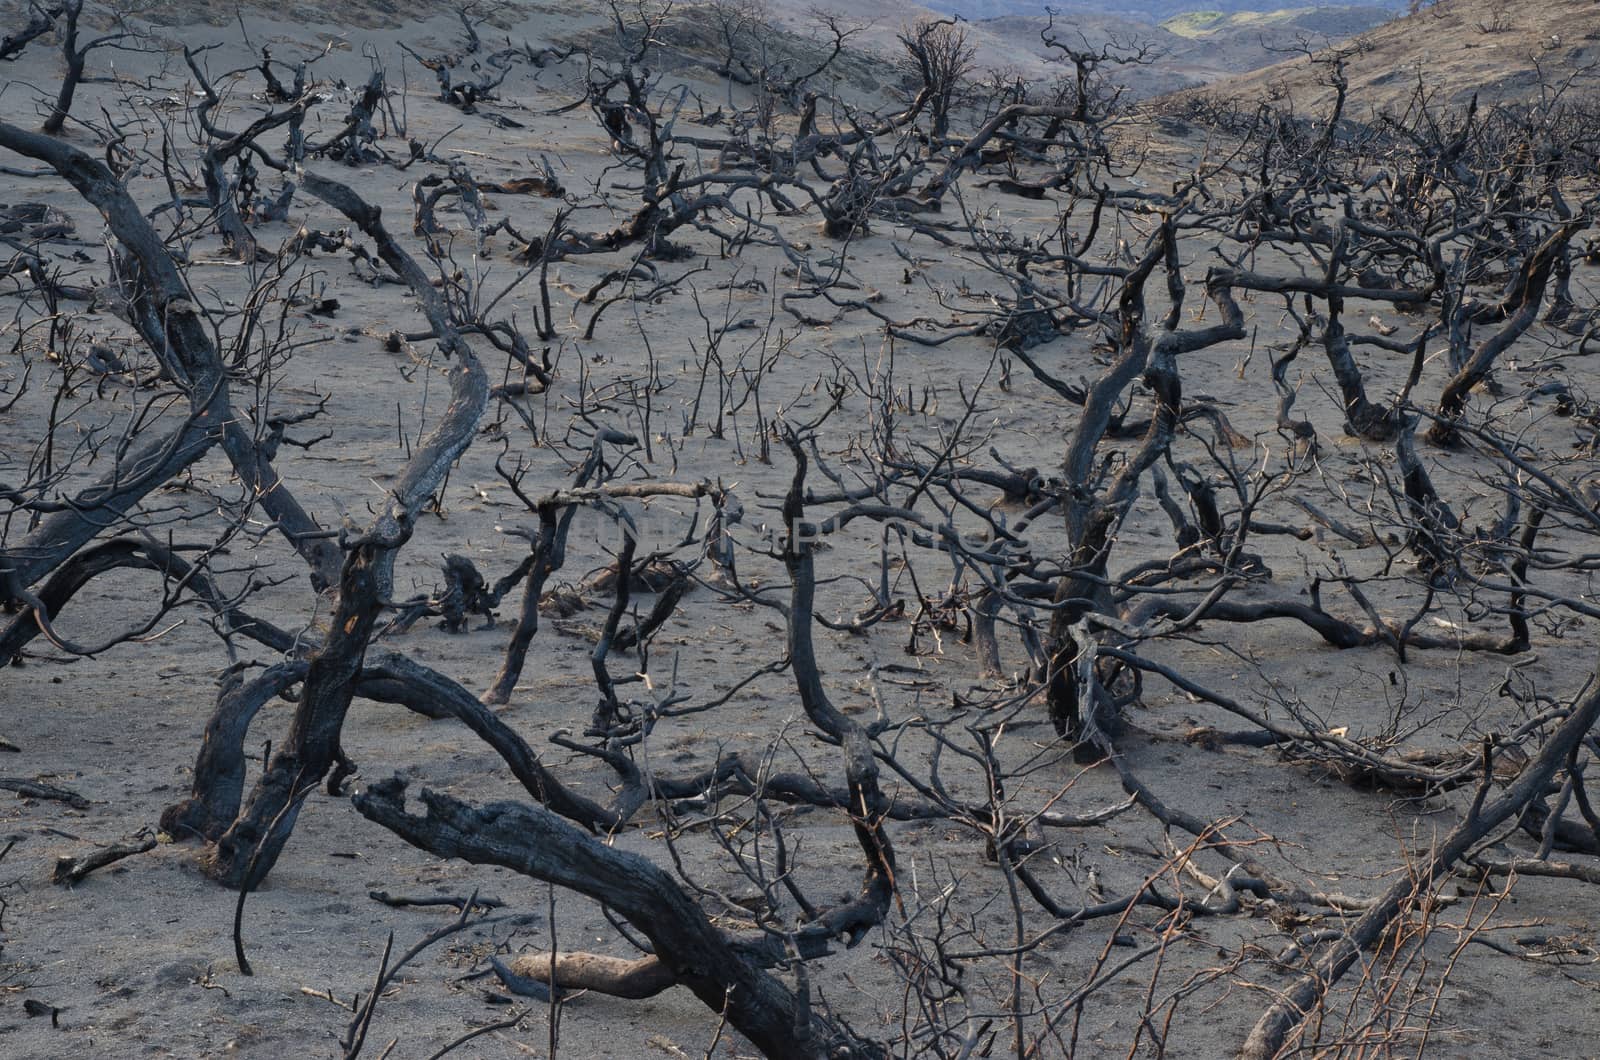 Burned bushes in the forest fire of 2011-2012. by VictorSuarez